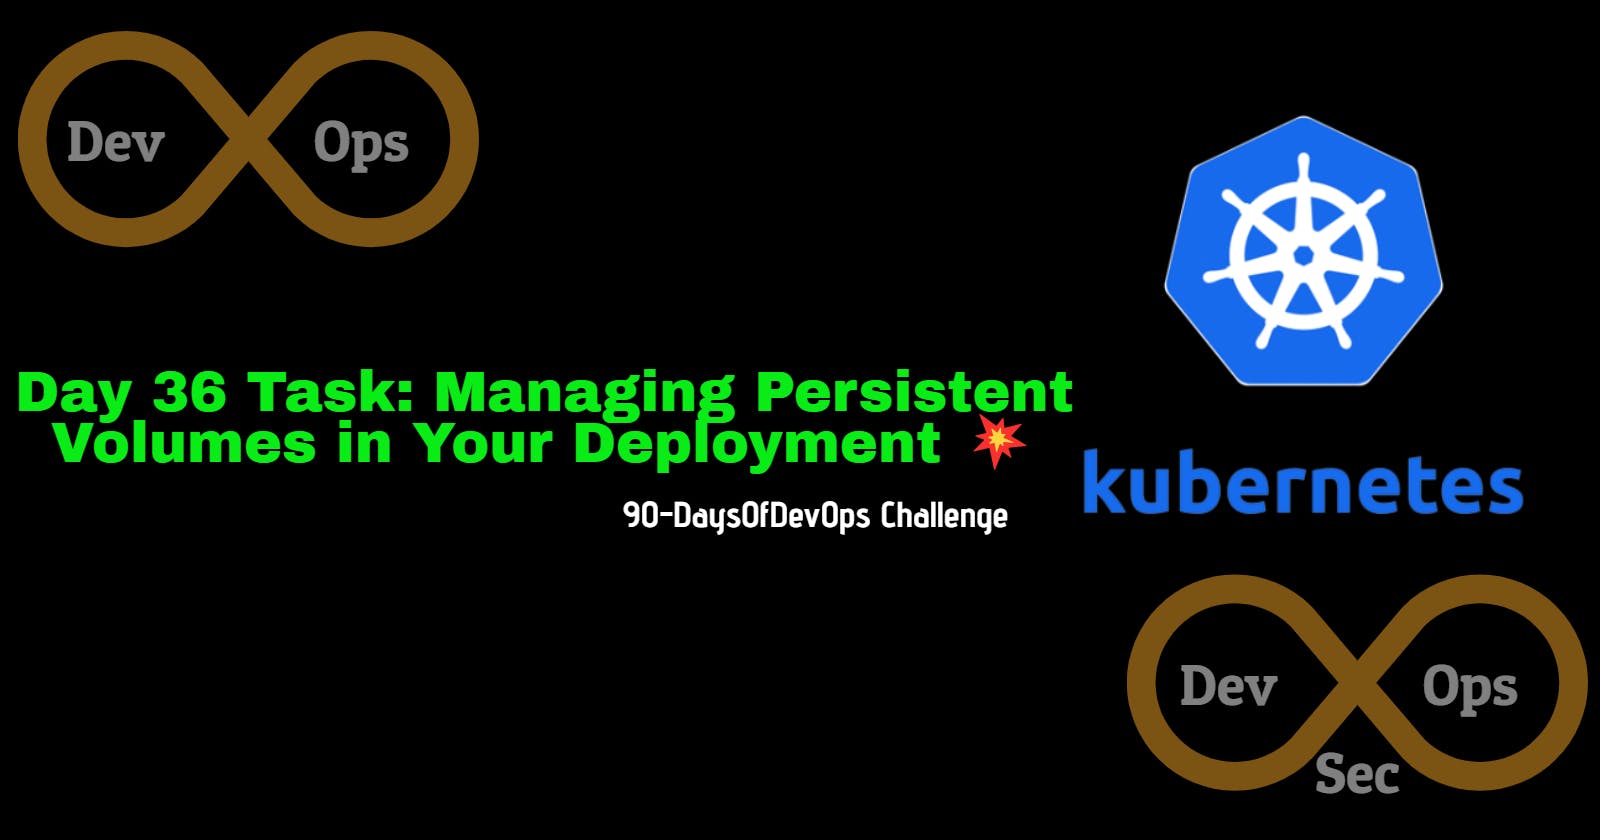 Day 36 Task: Managing Persistent Volumes in Your Deployment 💥